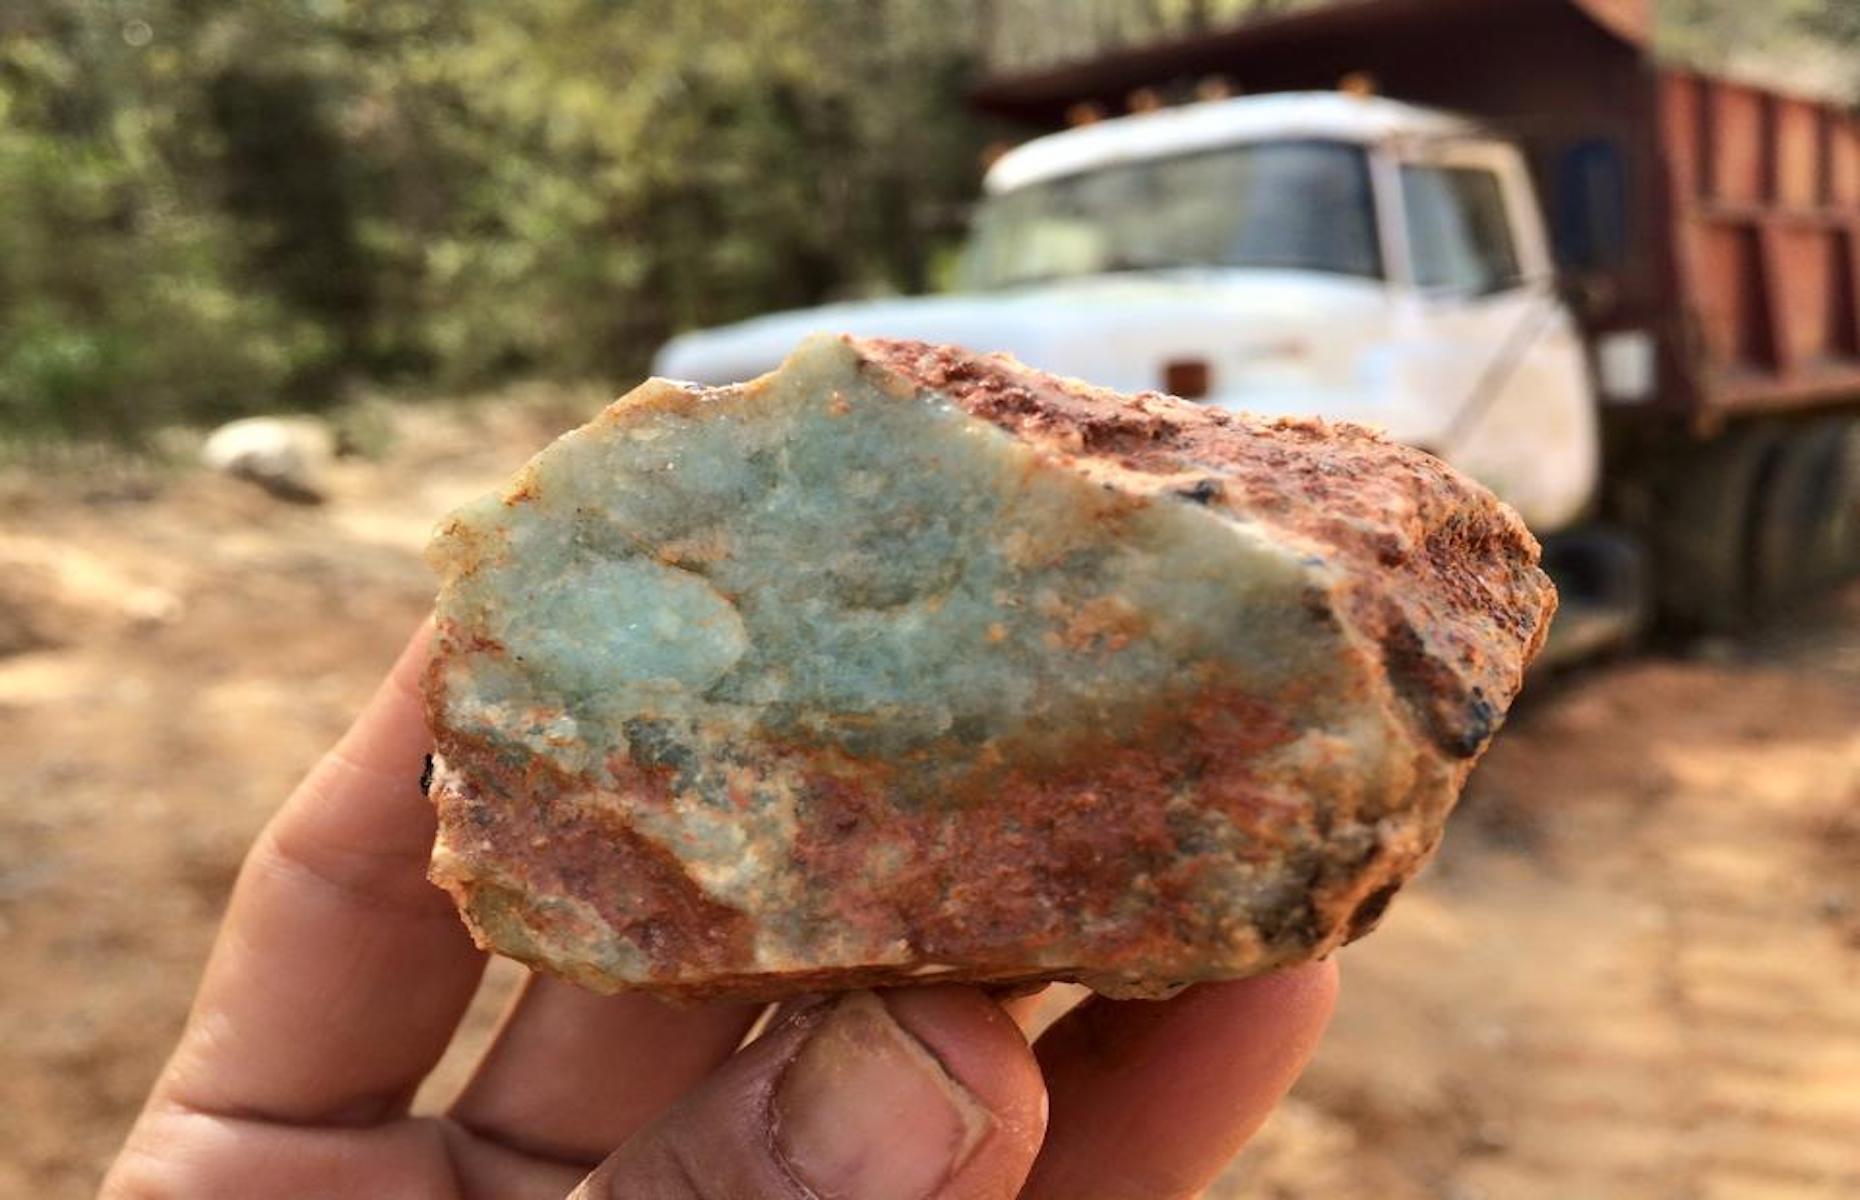 <p>Gem hunters can dig to their heart’s content at <a href="http://www.Diamondhillmine.com">this site</a>, with six acres of ground to mine in the southern Appalachian Mountains. It’s best known for its wide variety of quartz crystals, but beryl, garnet and epidote have also been discovered here and in rare cases, purple amethyst too. It’s a simple set-up with picnic tables and no running water, so come with plenty of supplies if you plan to stay long.</p>